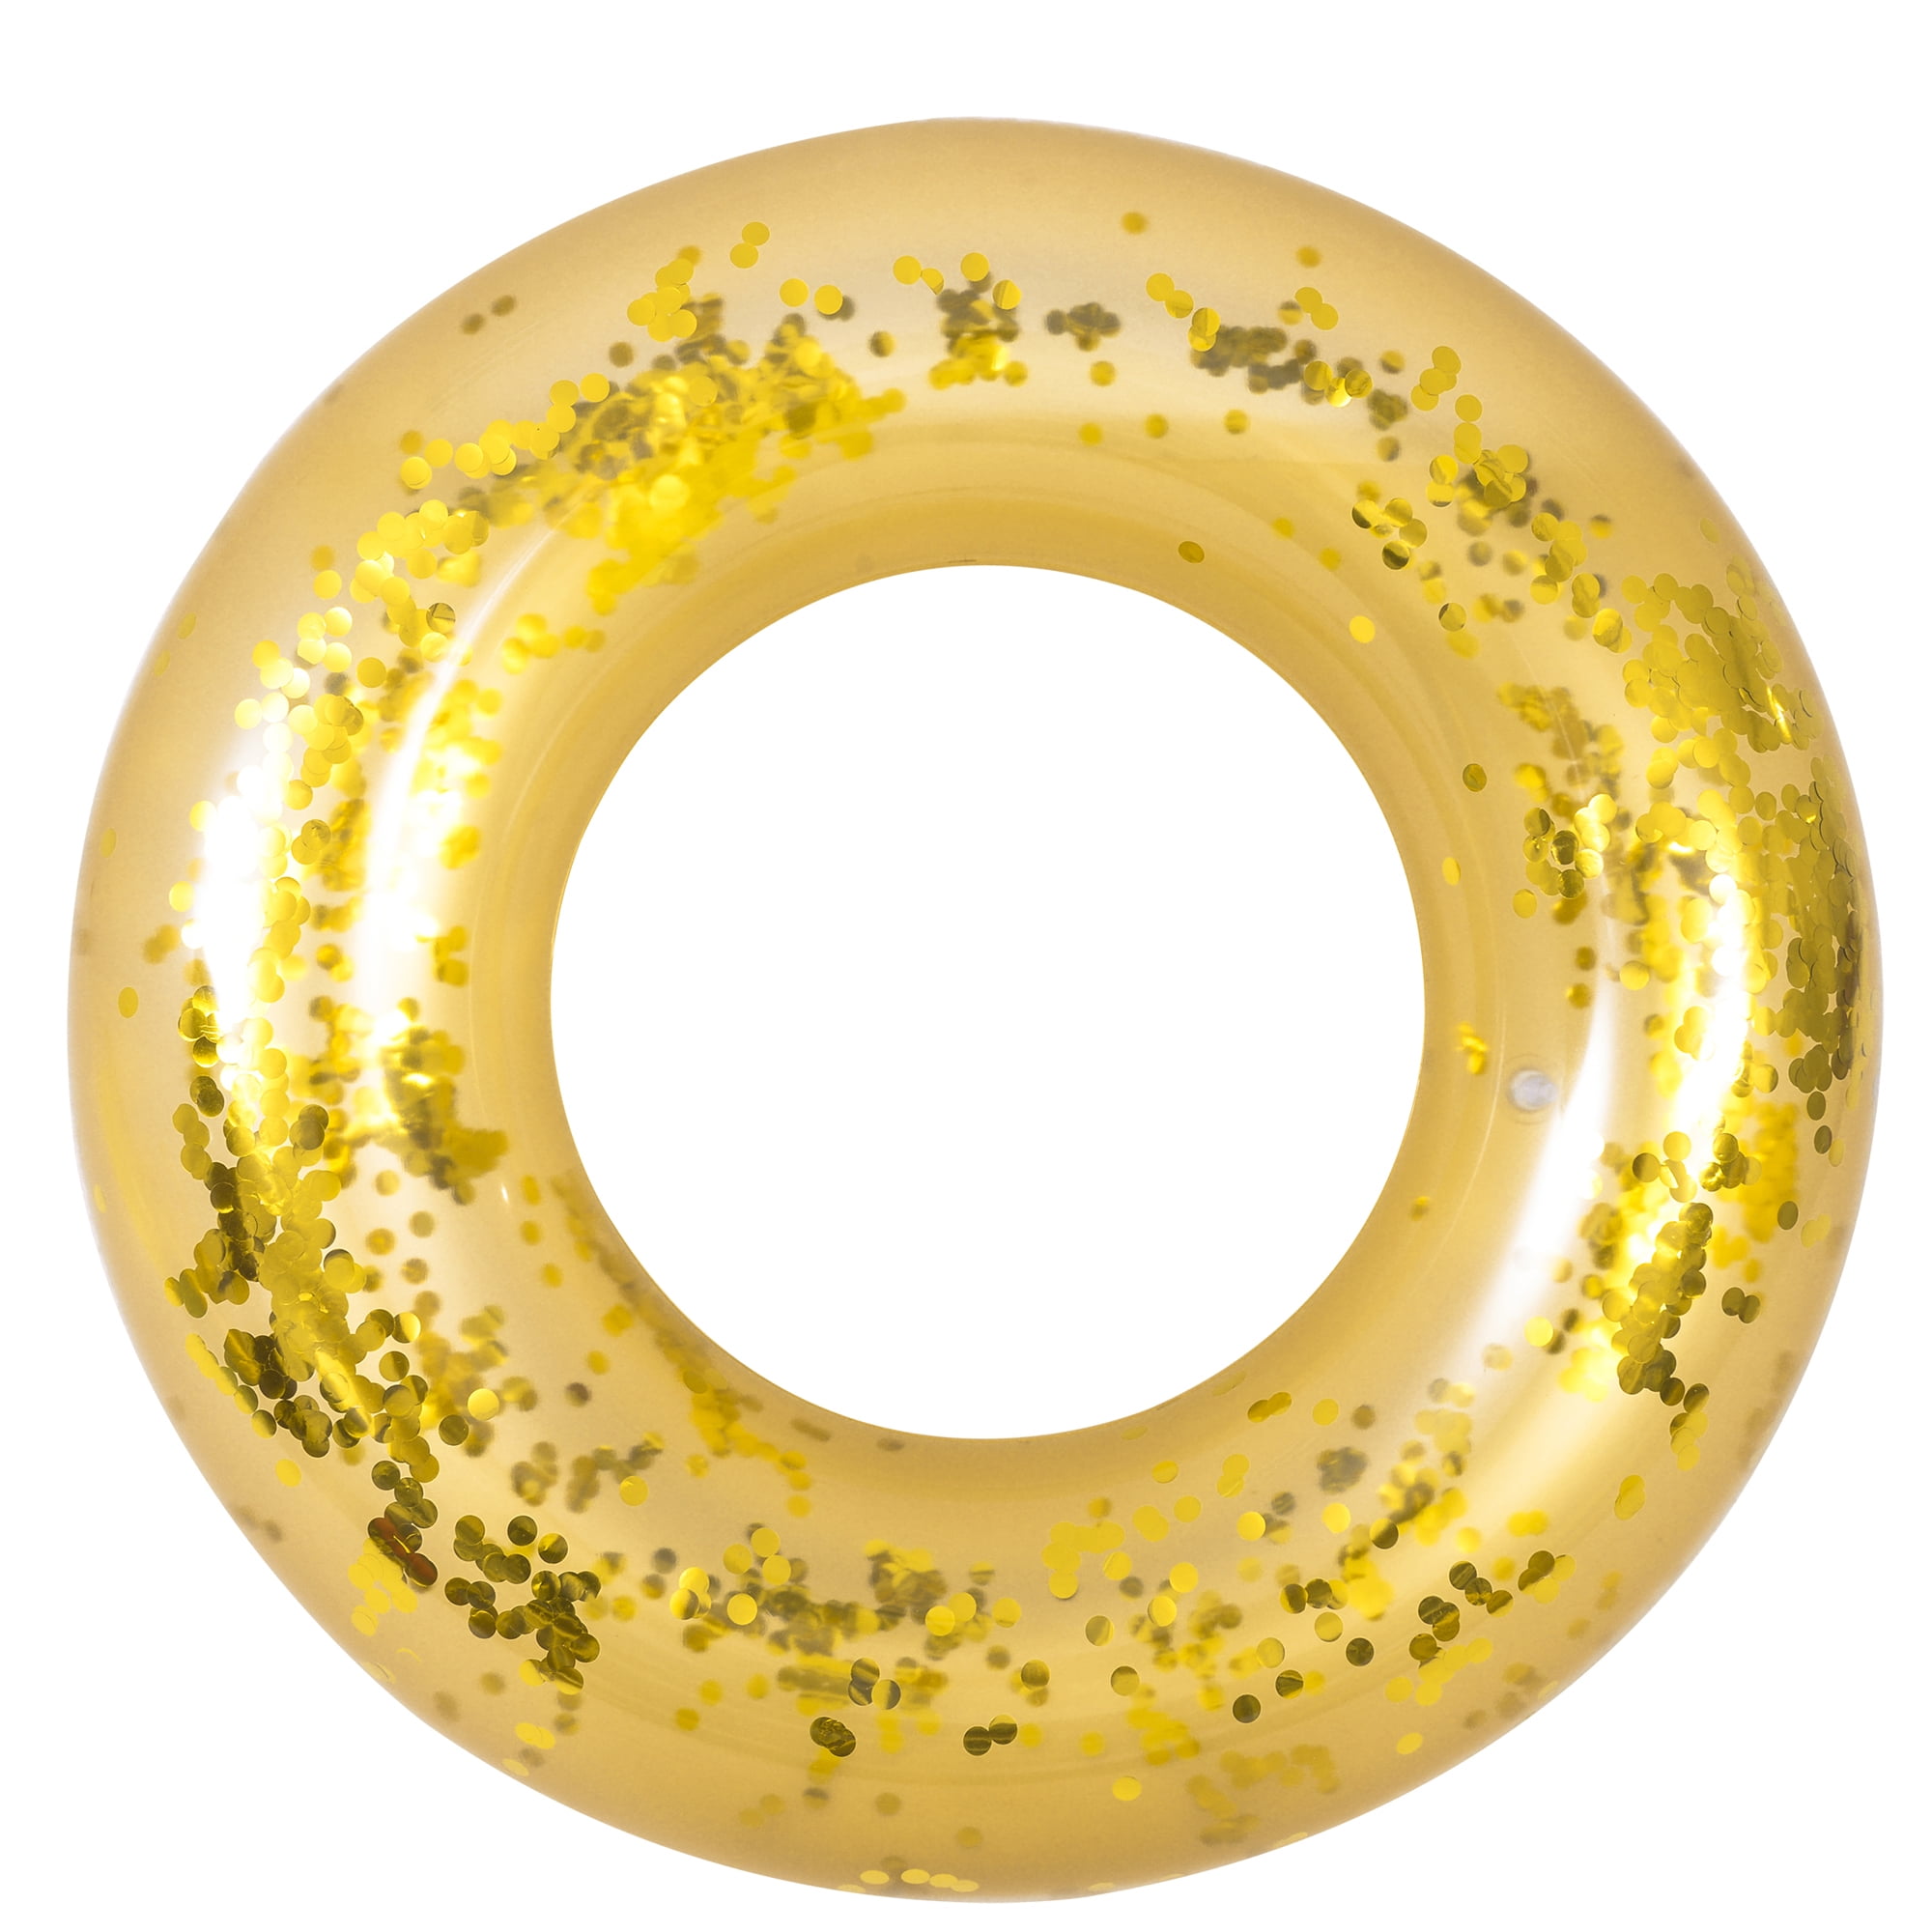 Jumbo Ring with Glitter Gold Swim Ring Tube Inflatable Pool Float 40"x40"